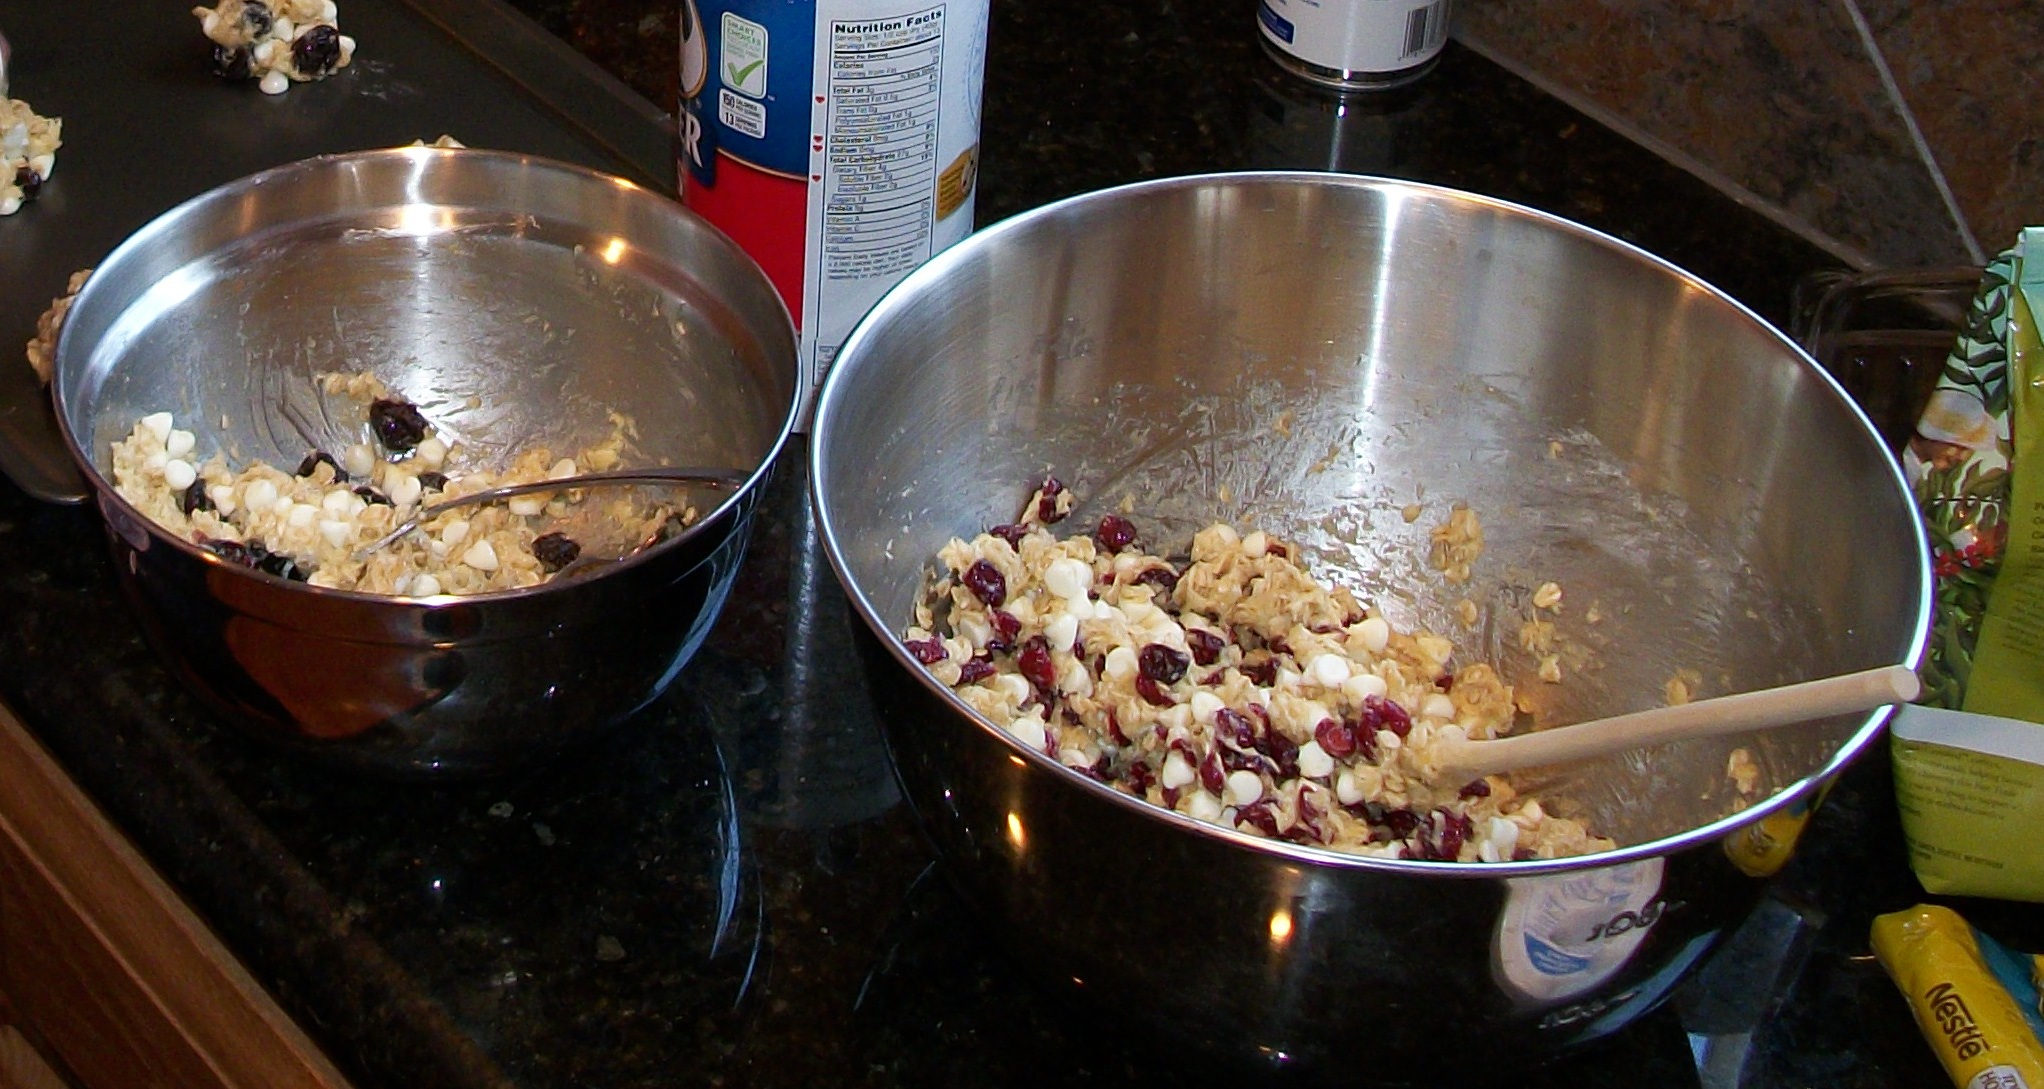 White Chocolate Oatmeal Cookie Dough Mix Batter with Cherries and Cranberries